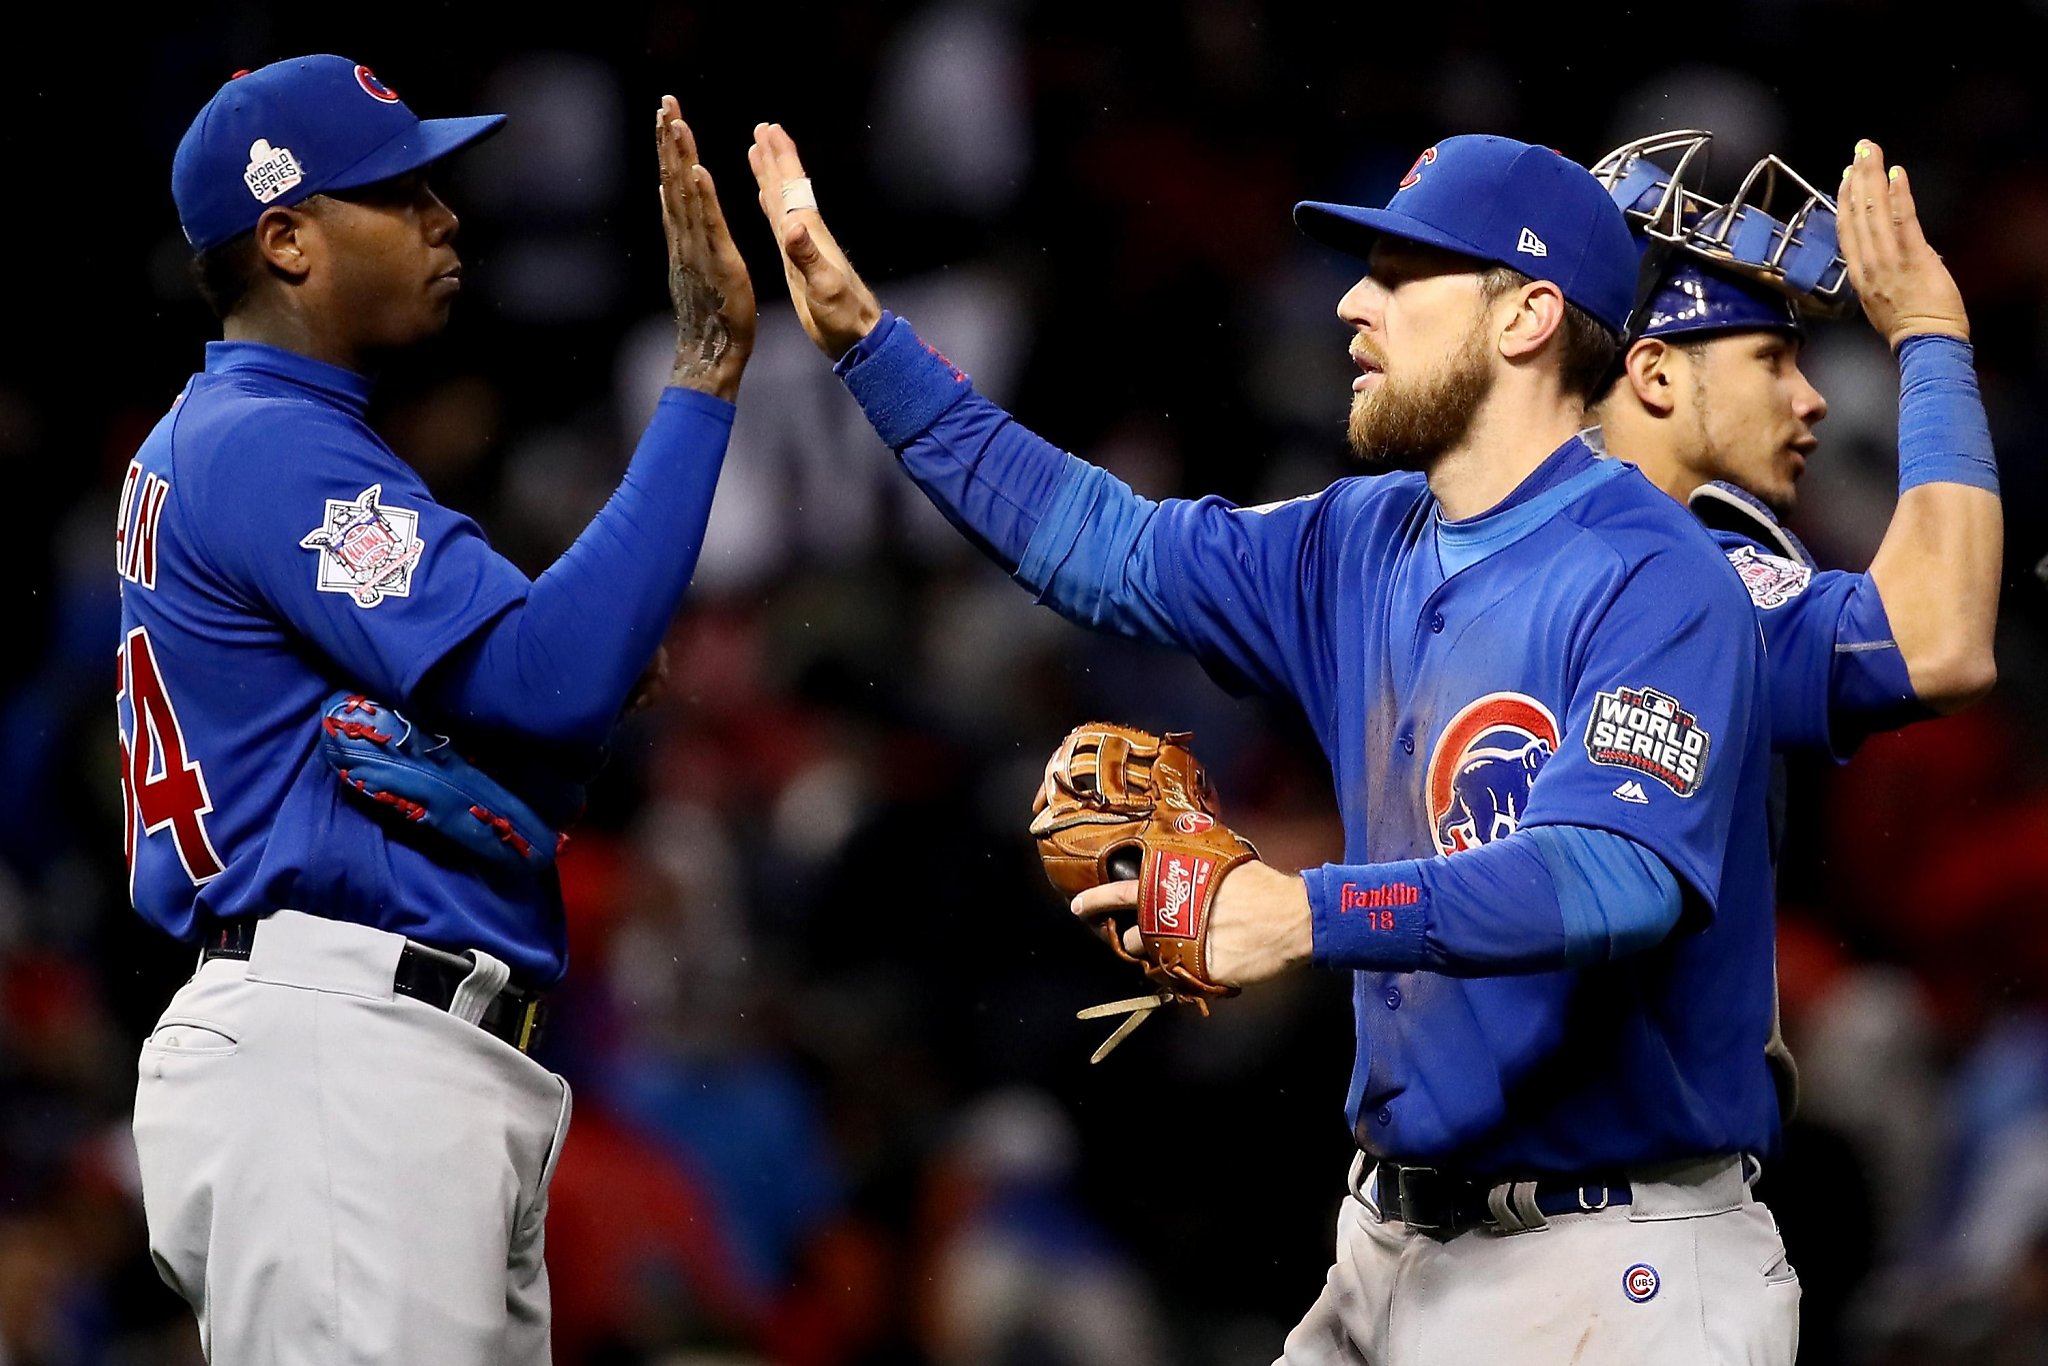 Cubs tie World Series, Indians hope to ride Corey Kluber